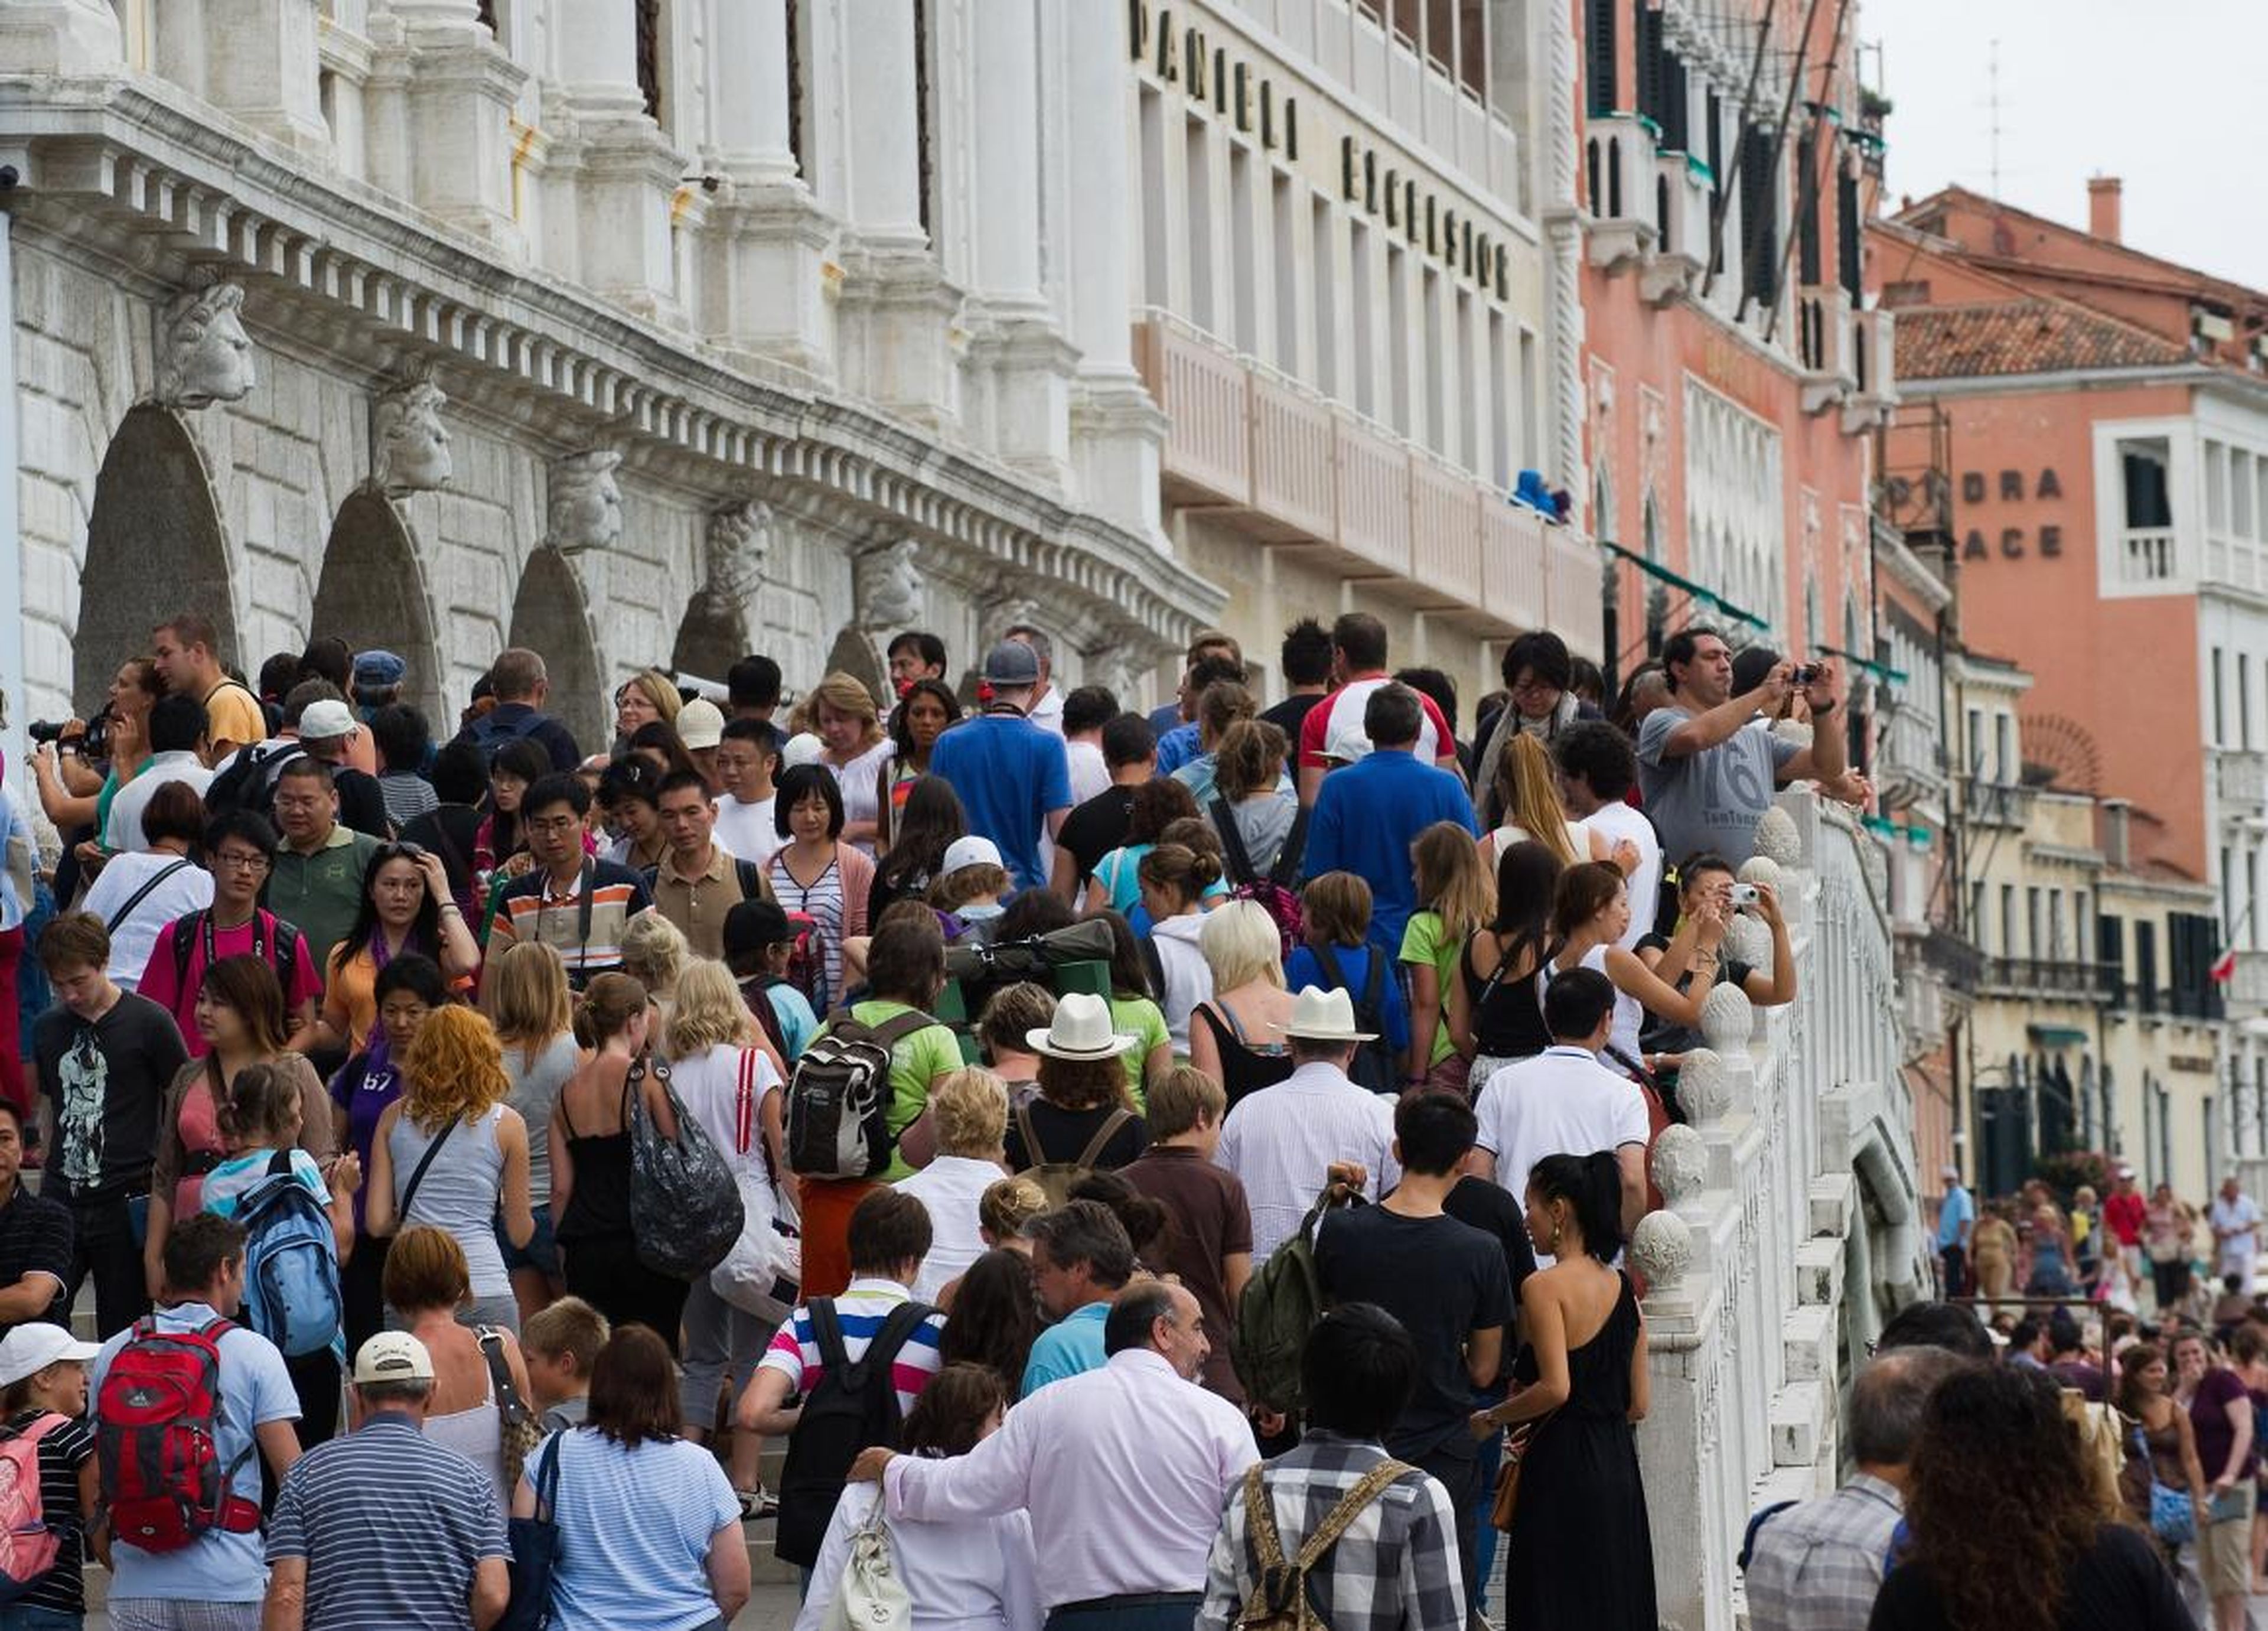 Crowds and Venice are unfortunately kind of a package deal these days.